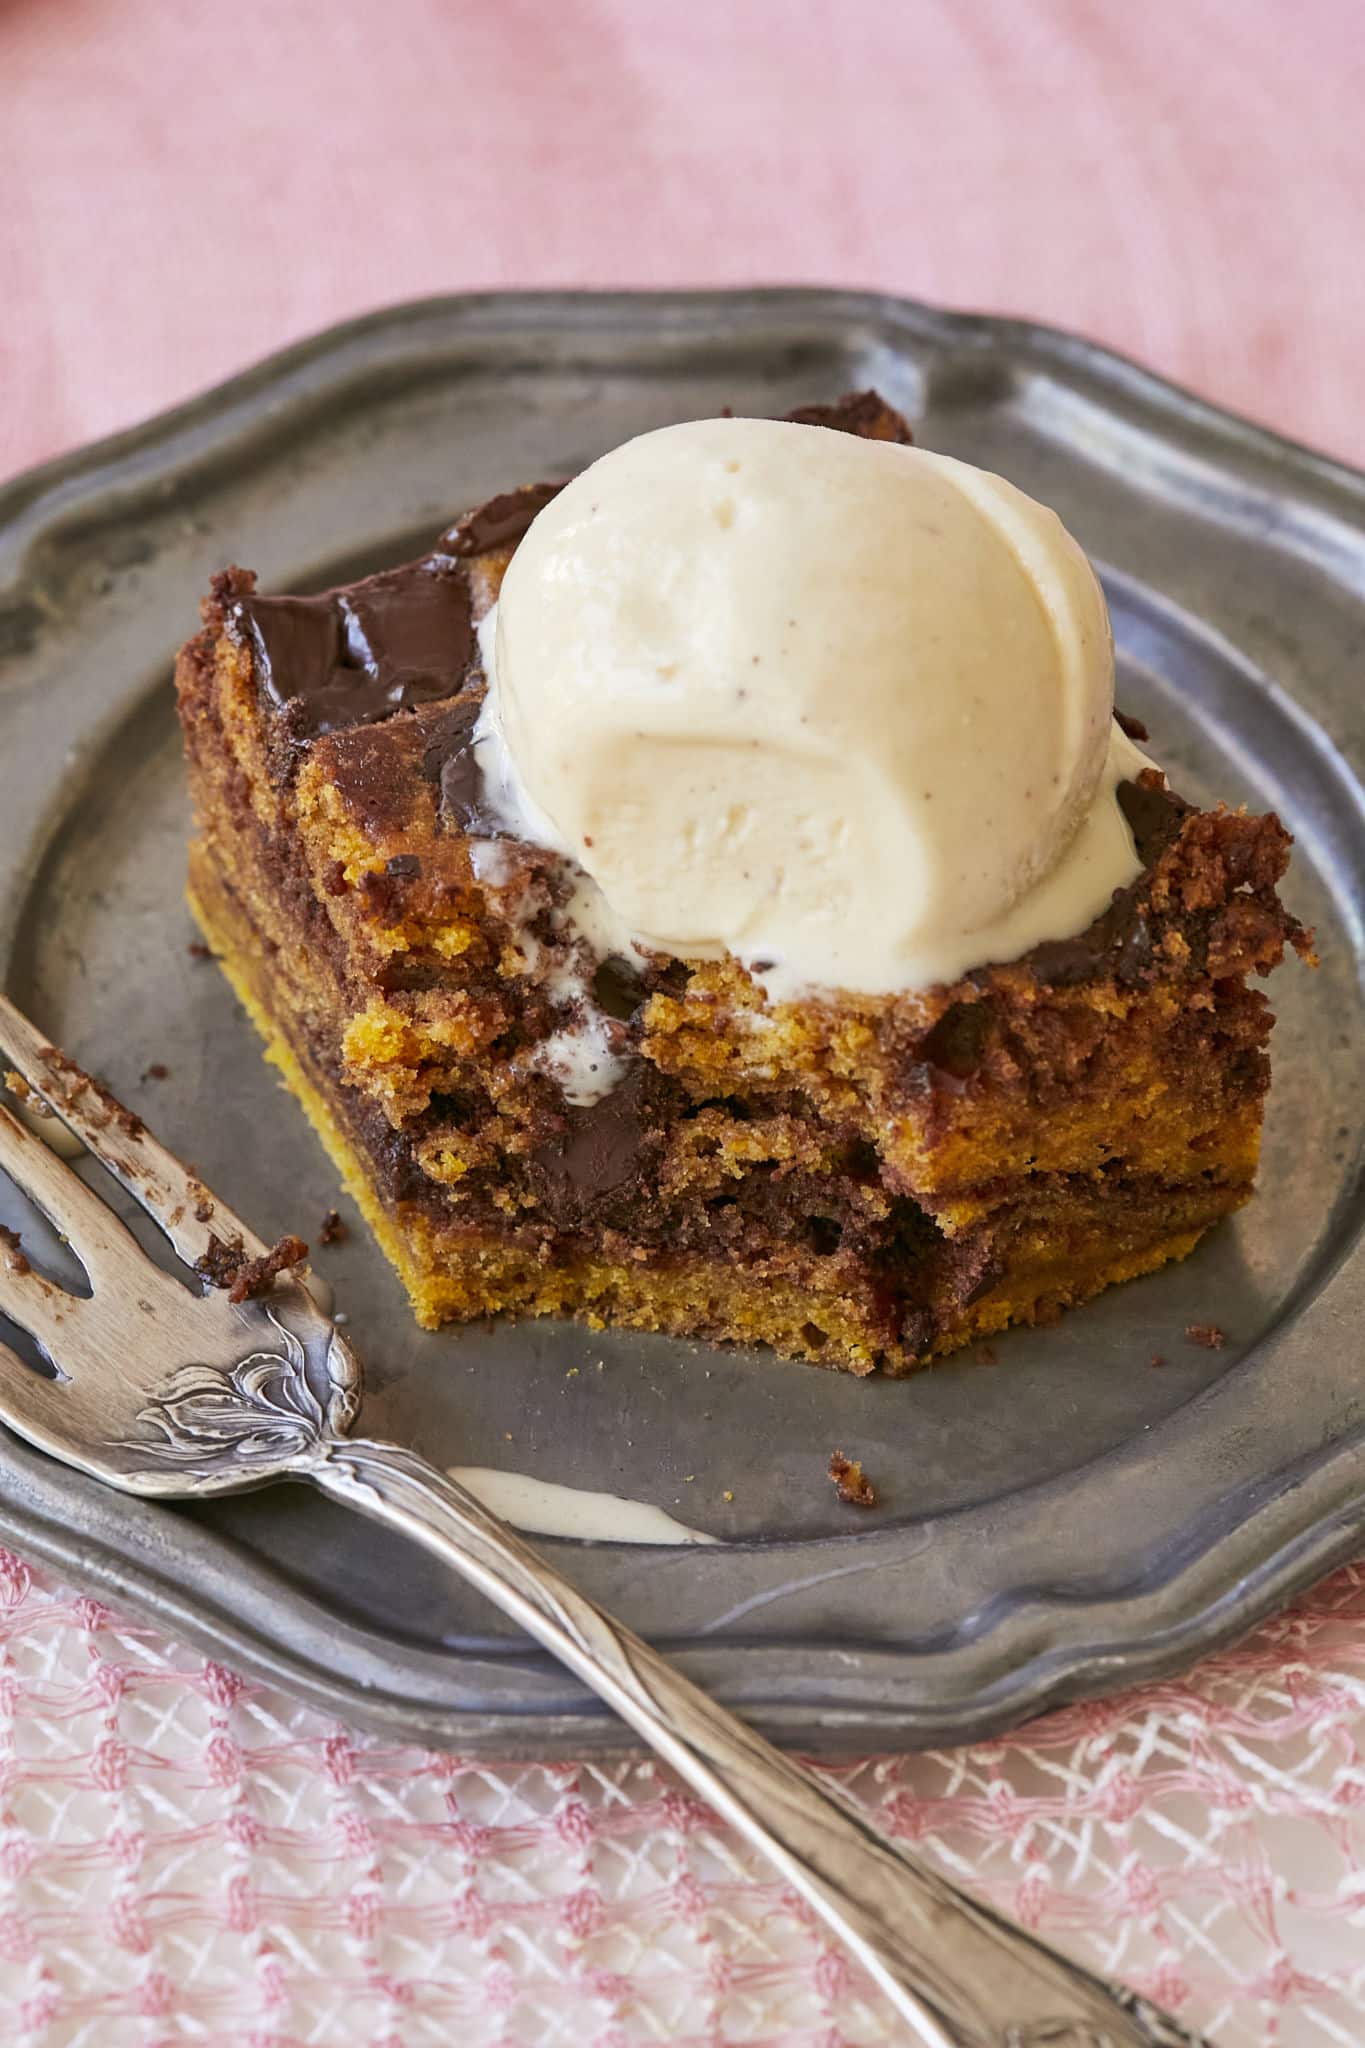 A close-up photo of a pumpkin pie brownie topped with vanilla ice cream. There is a single bite taken from the brownie.